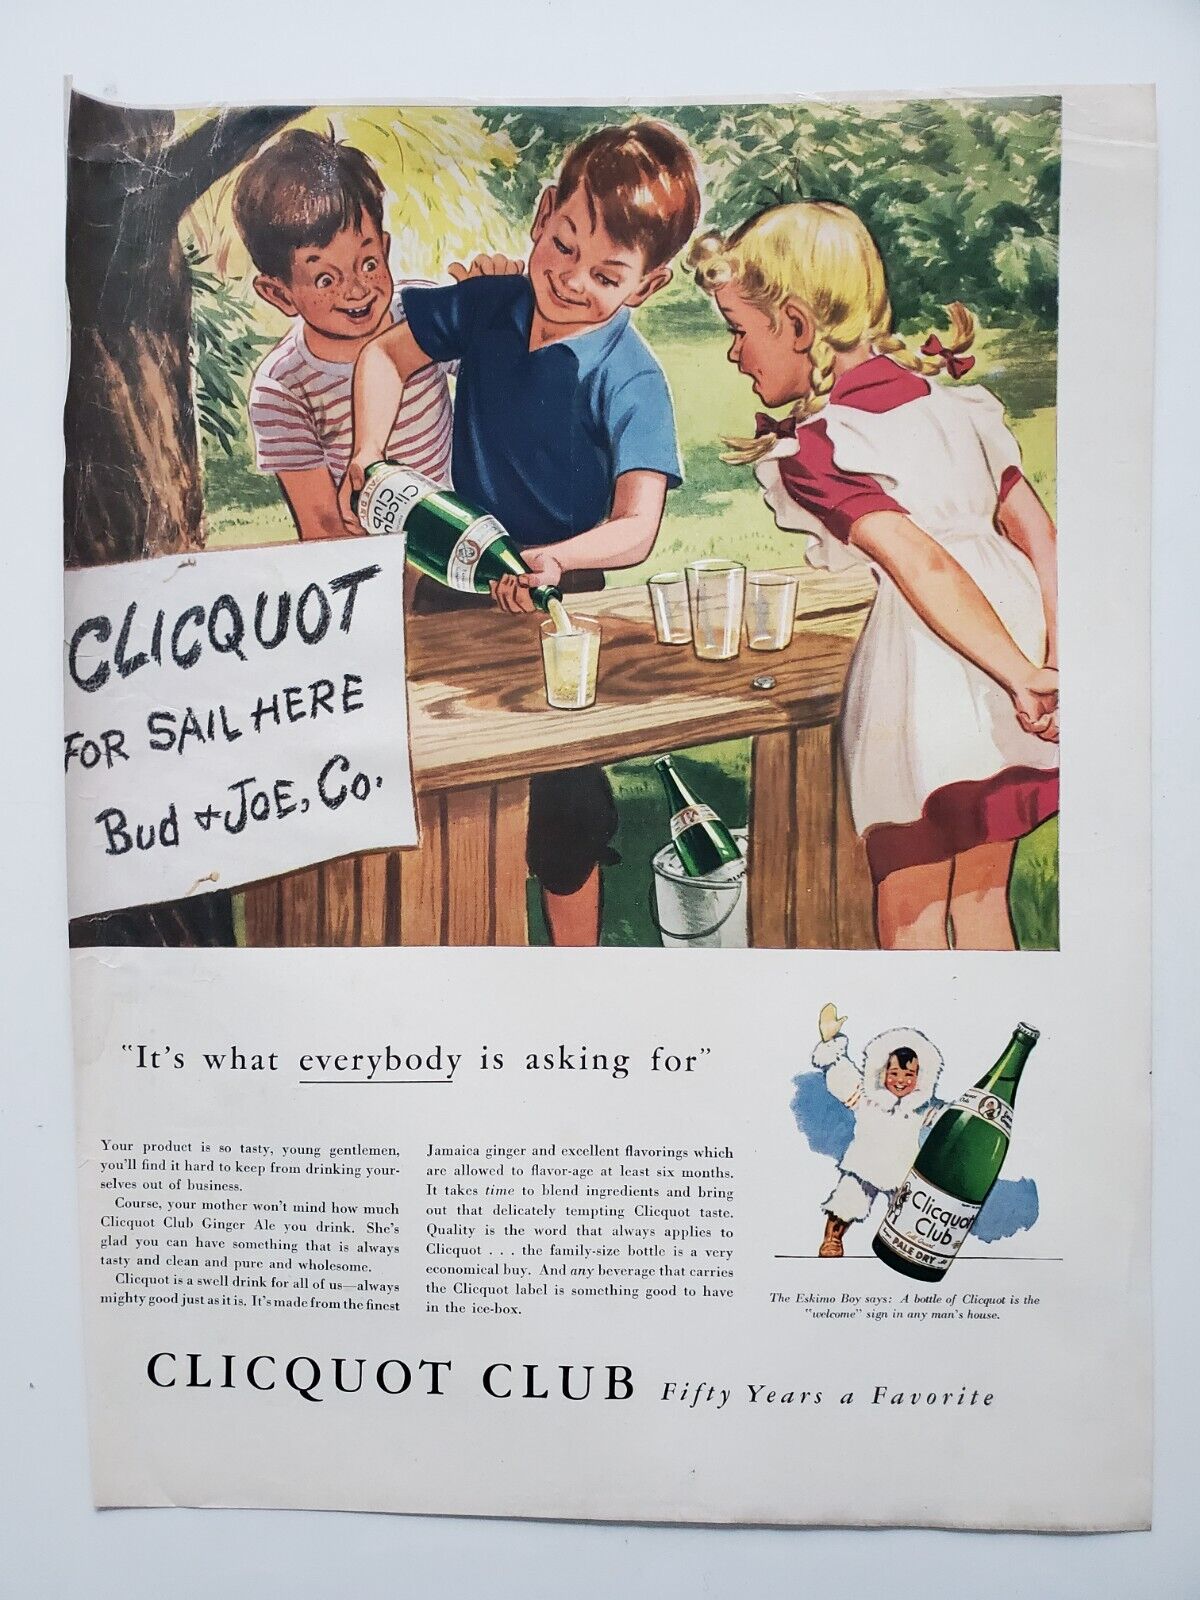 Cliquot Club Ginger Ale Boys Girl For Sale Stand Trees 1942 Vintage Print Ad